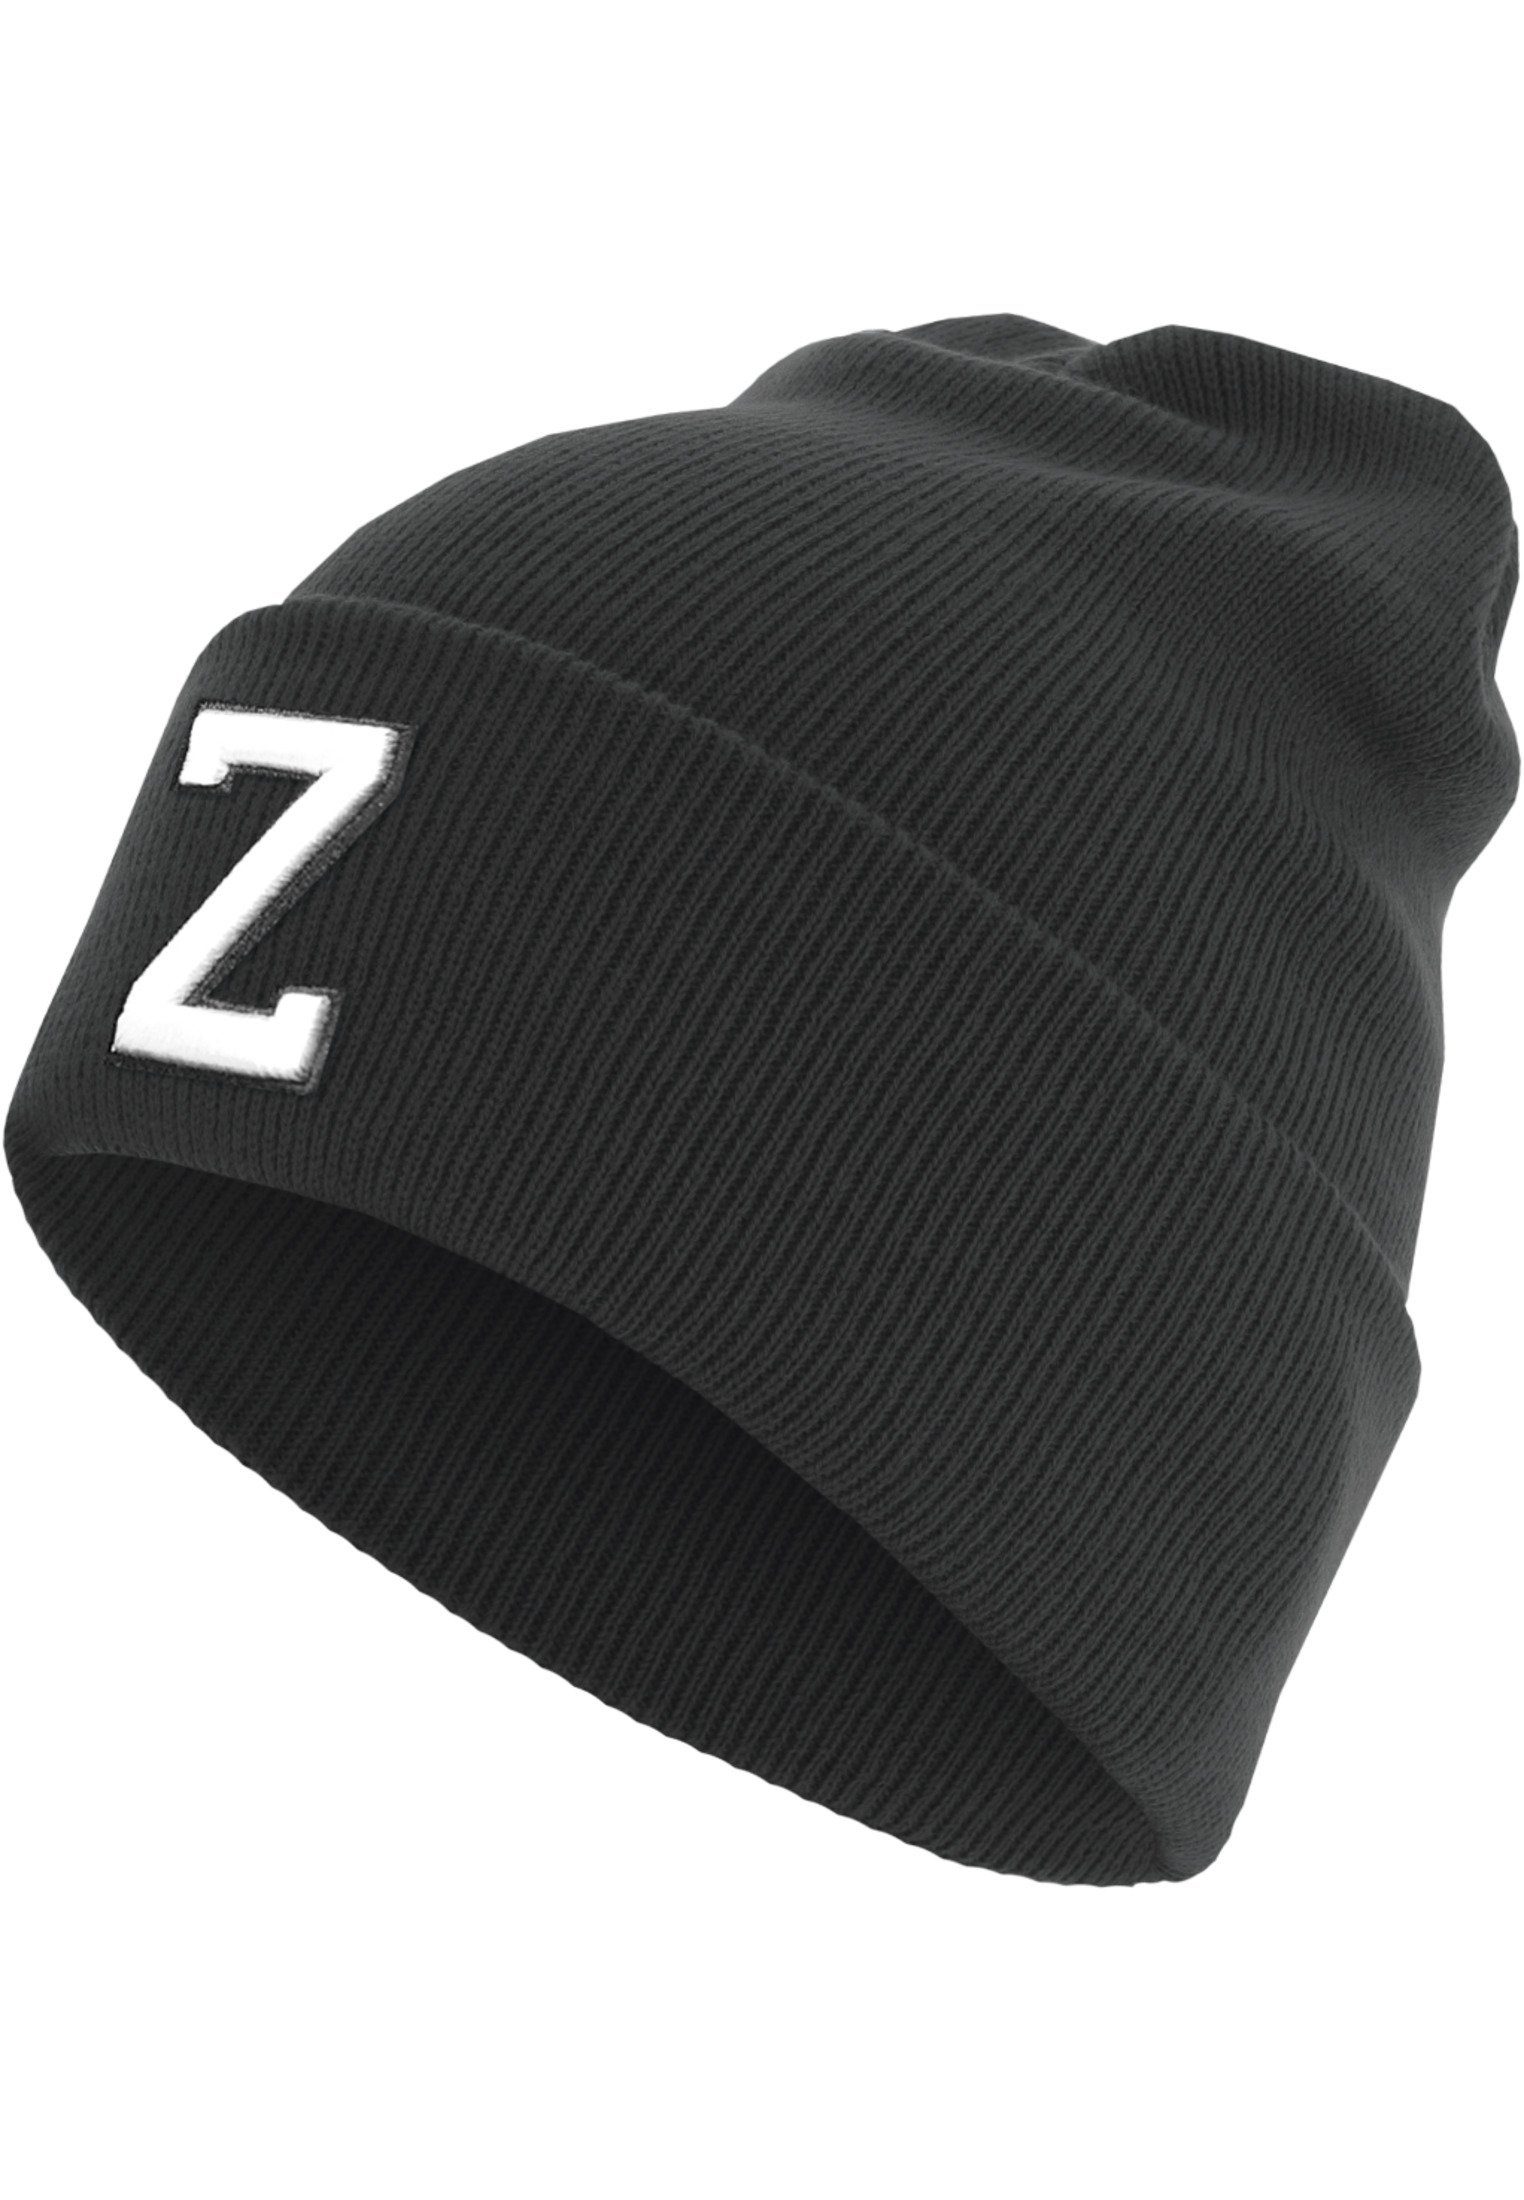 Accessoires Knit MSTRDS (1-St) Beanie Cuff Z Letter Beanie